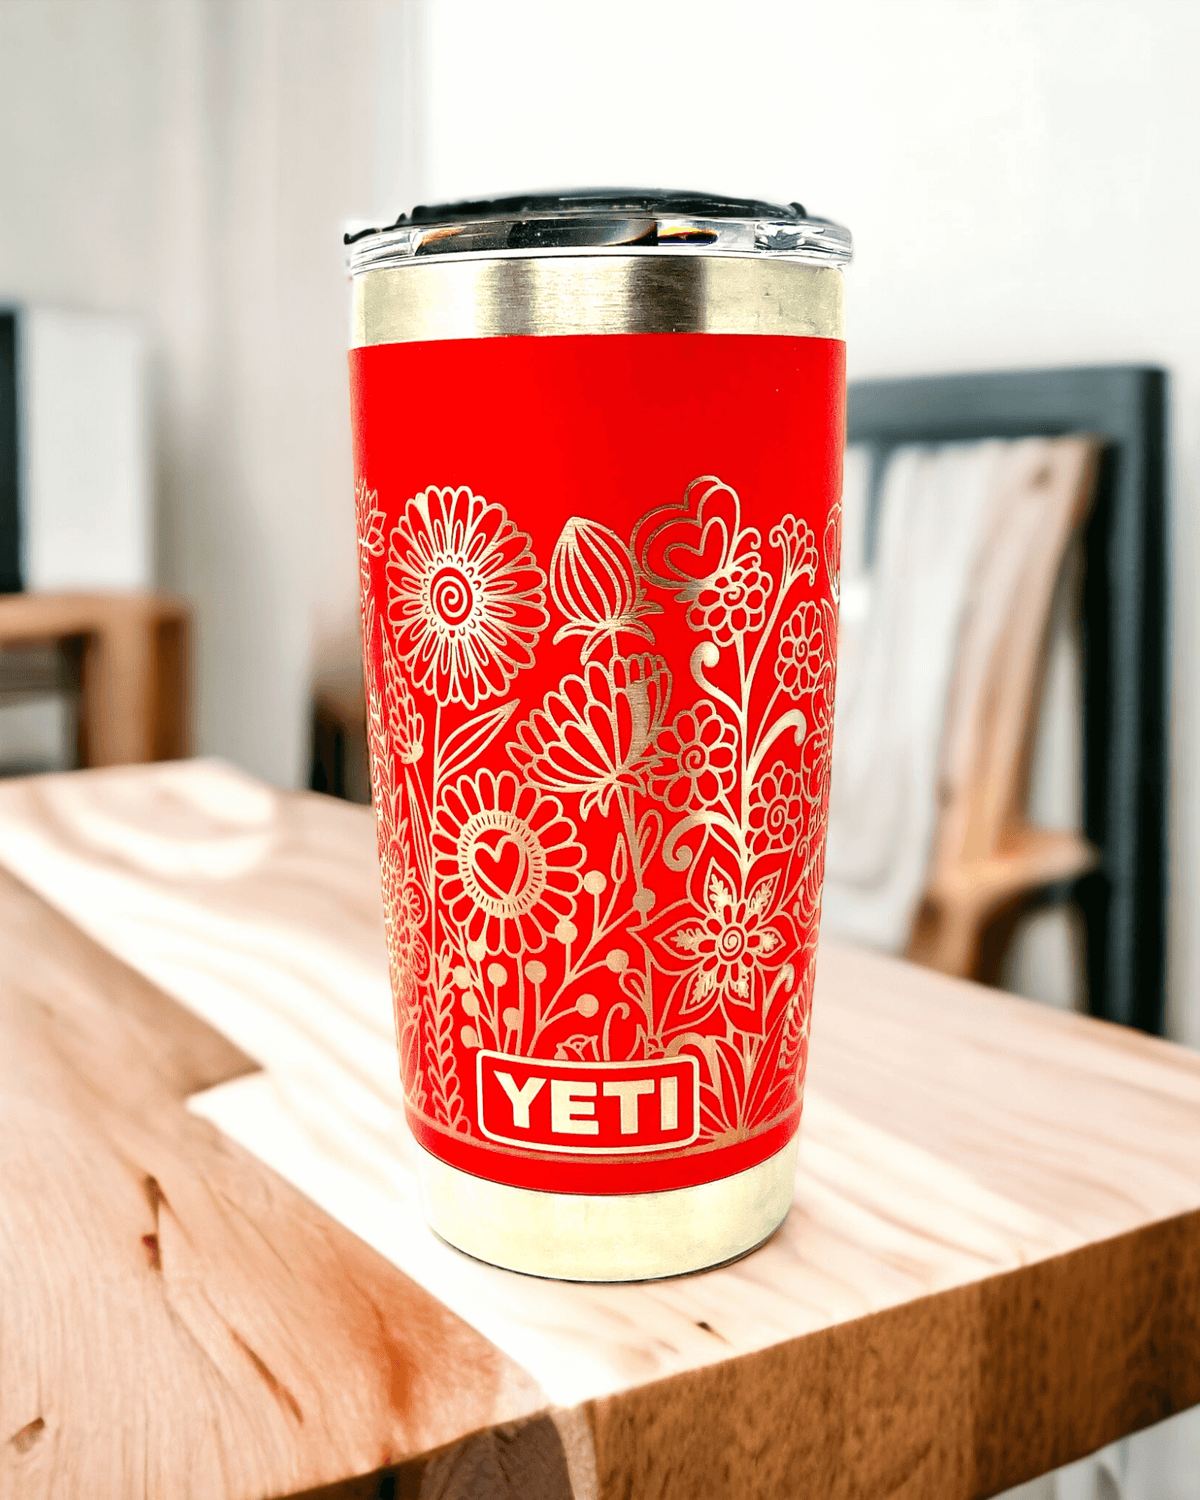 Joseph's Clothier — Limited Edition Yeti 65 Red